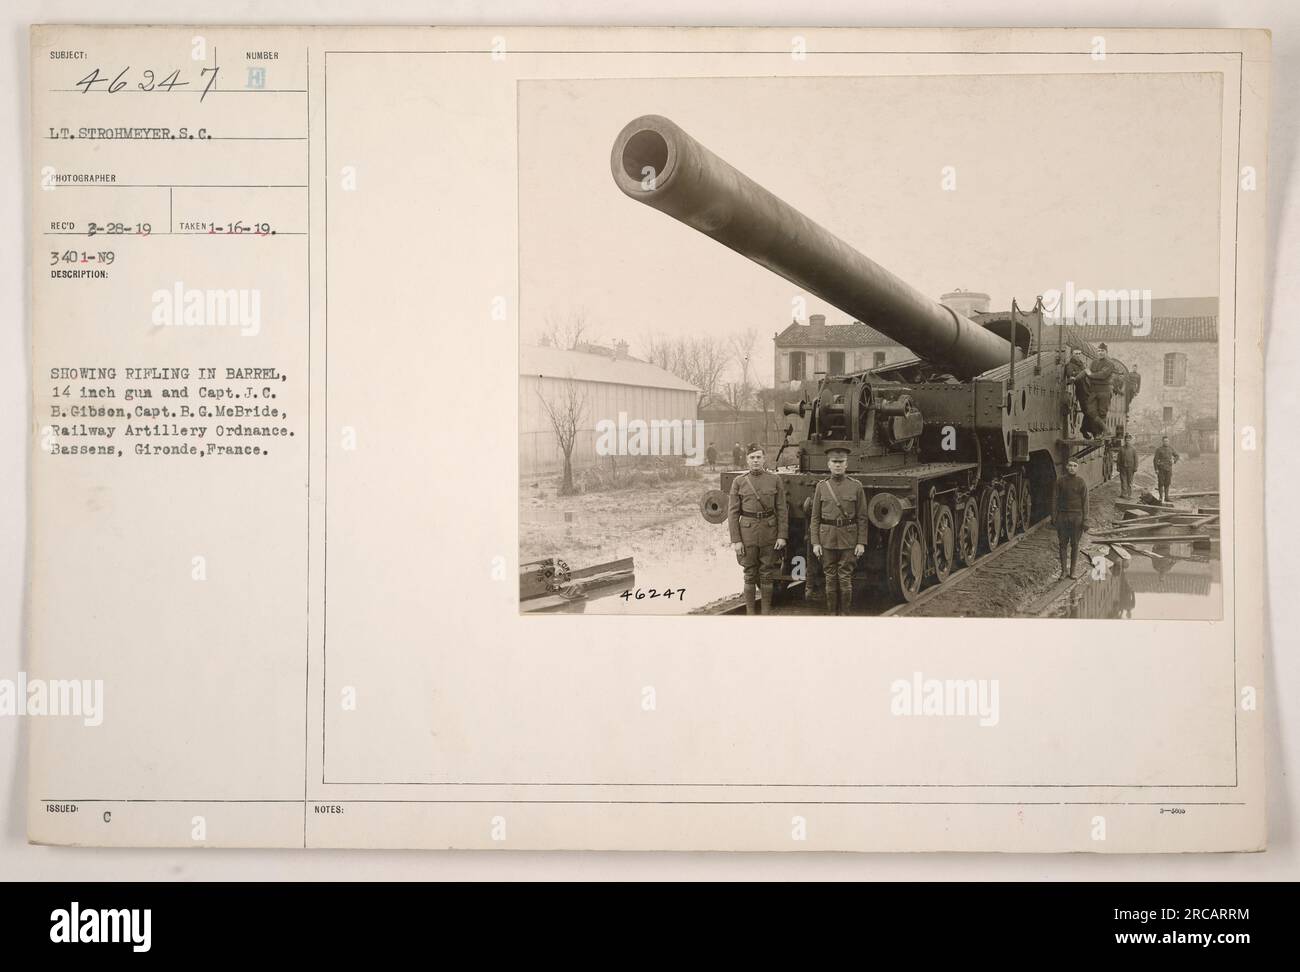 Caption: 'Image depicts the rifling in the barrel of a 14 inch gun, along with Capt. J.C.B. Gibson and Capt. G.G. McBride from Railway Artillery Ordnance. The photograph was taken in Bassens, Gironde, France on January 16, 1919. This image is subject number 46347 and was received by photographer LT. Strohmeyer.S.C. on February 29, 1919. It is documented under reference number 3401-19 with corresponding notes referenced as C NOTES 46247.' Stock Photo